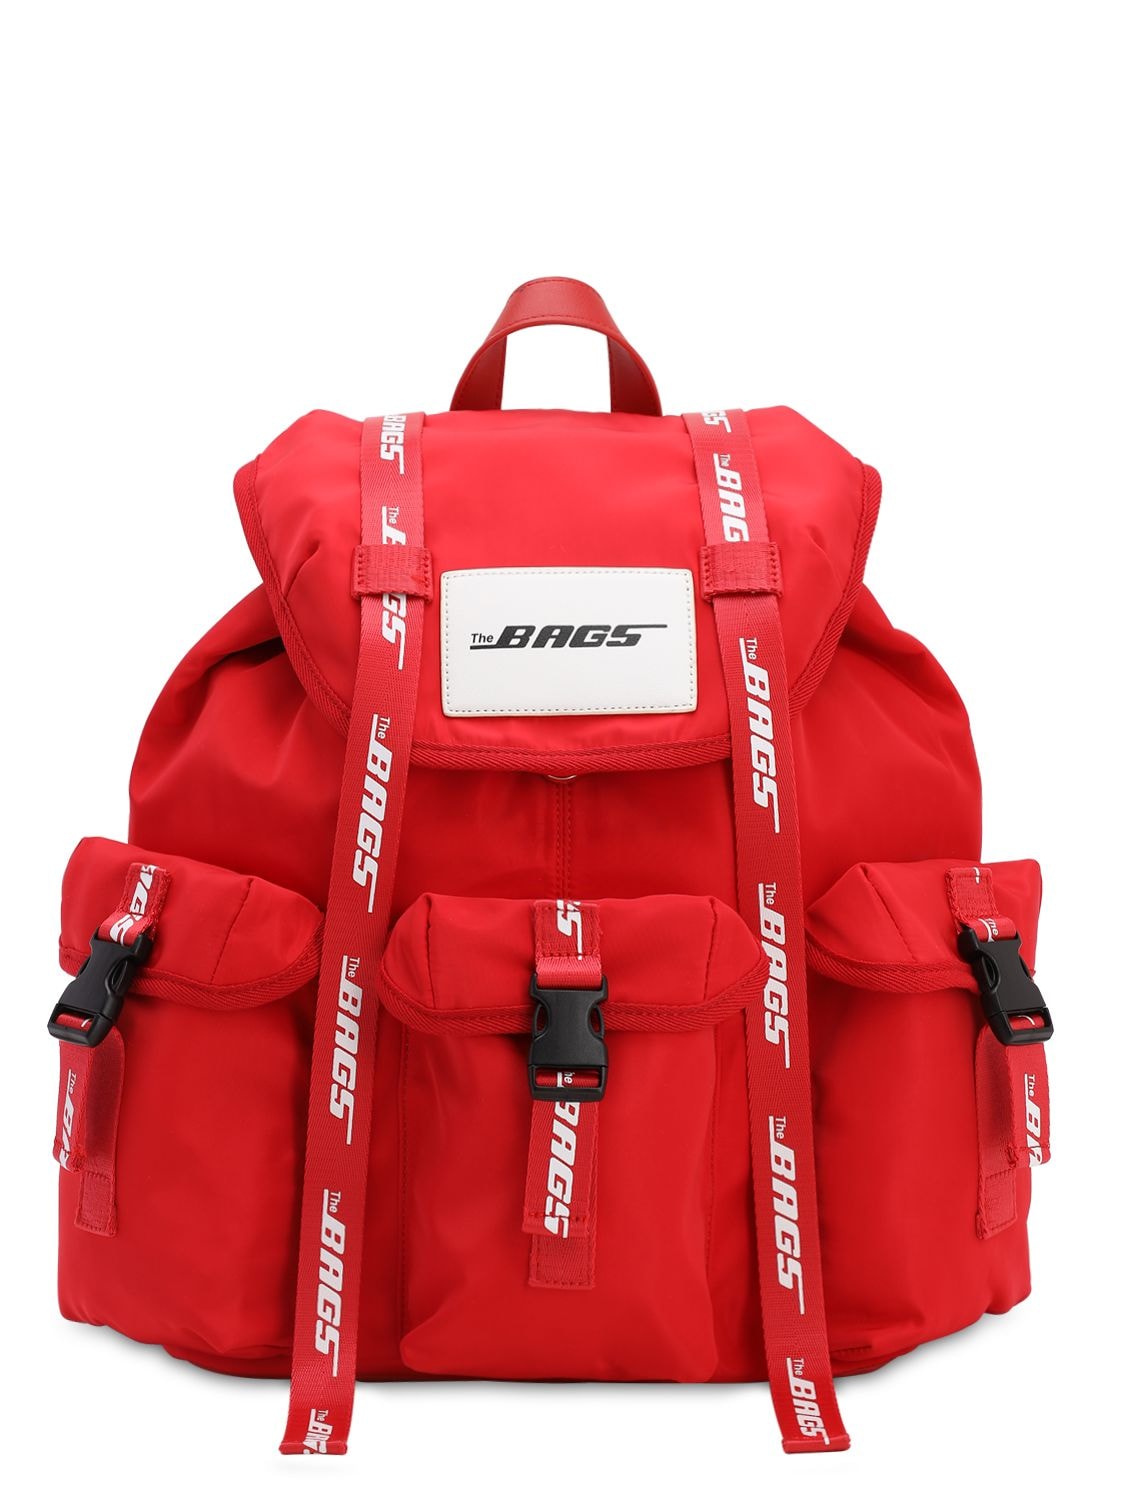 The Bags Nylon Backpack In Red